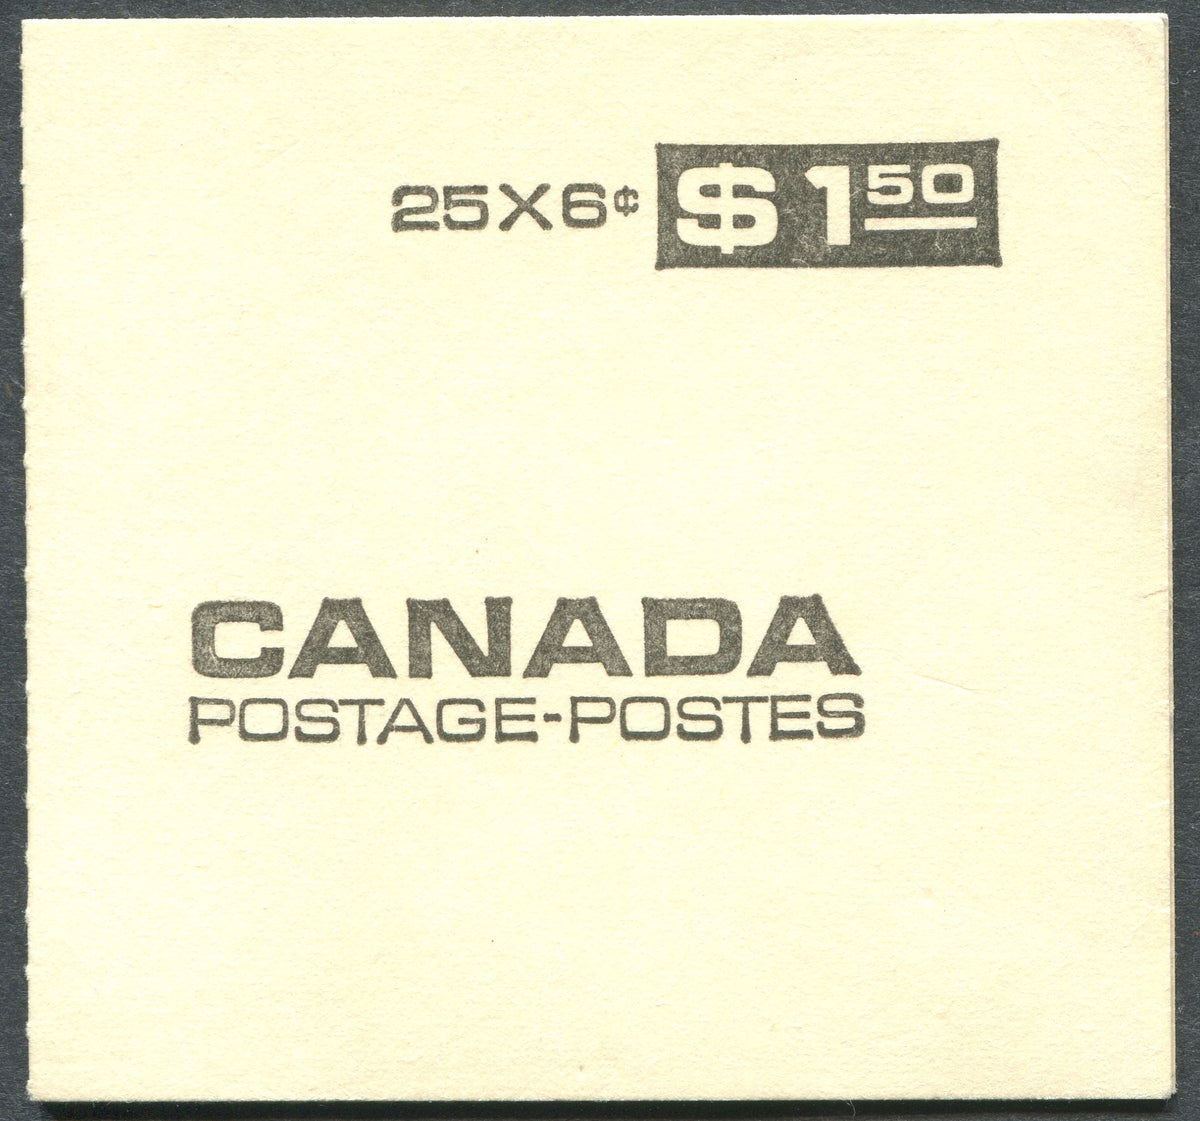 0460CA2002 - Canada #460aiii - Used Booklet Pane of 25